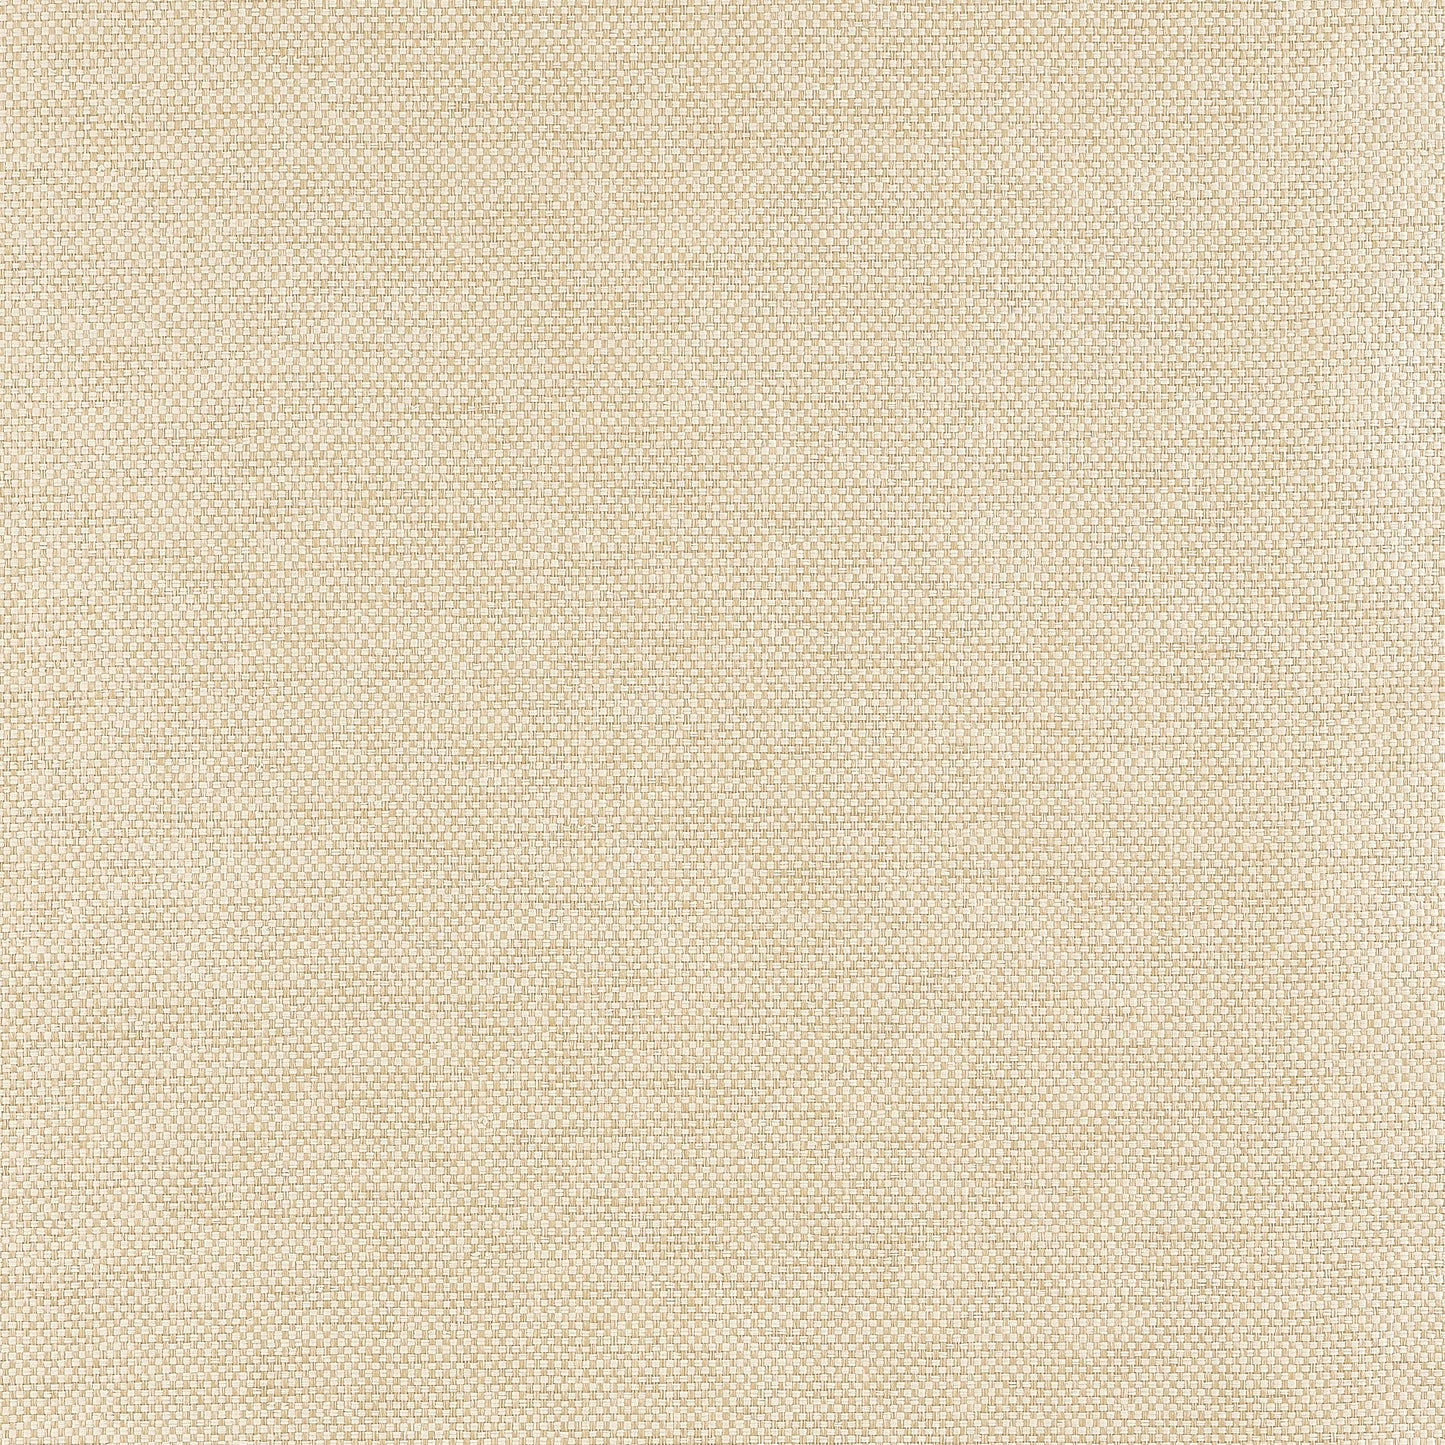 Purchase Thibaut Wallpaper Product# T19682 pattern name Clarkson Weave color Wheat. 